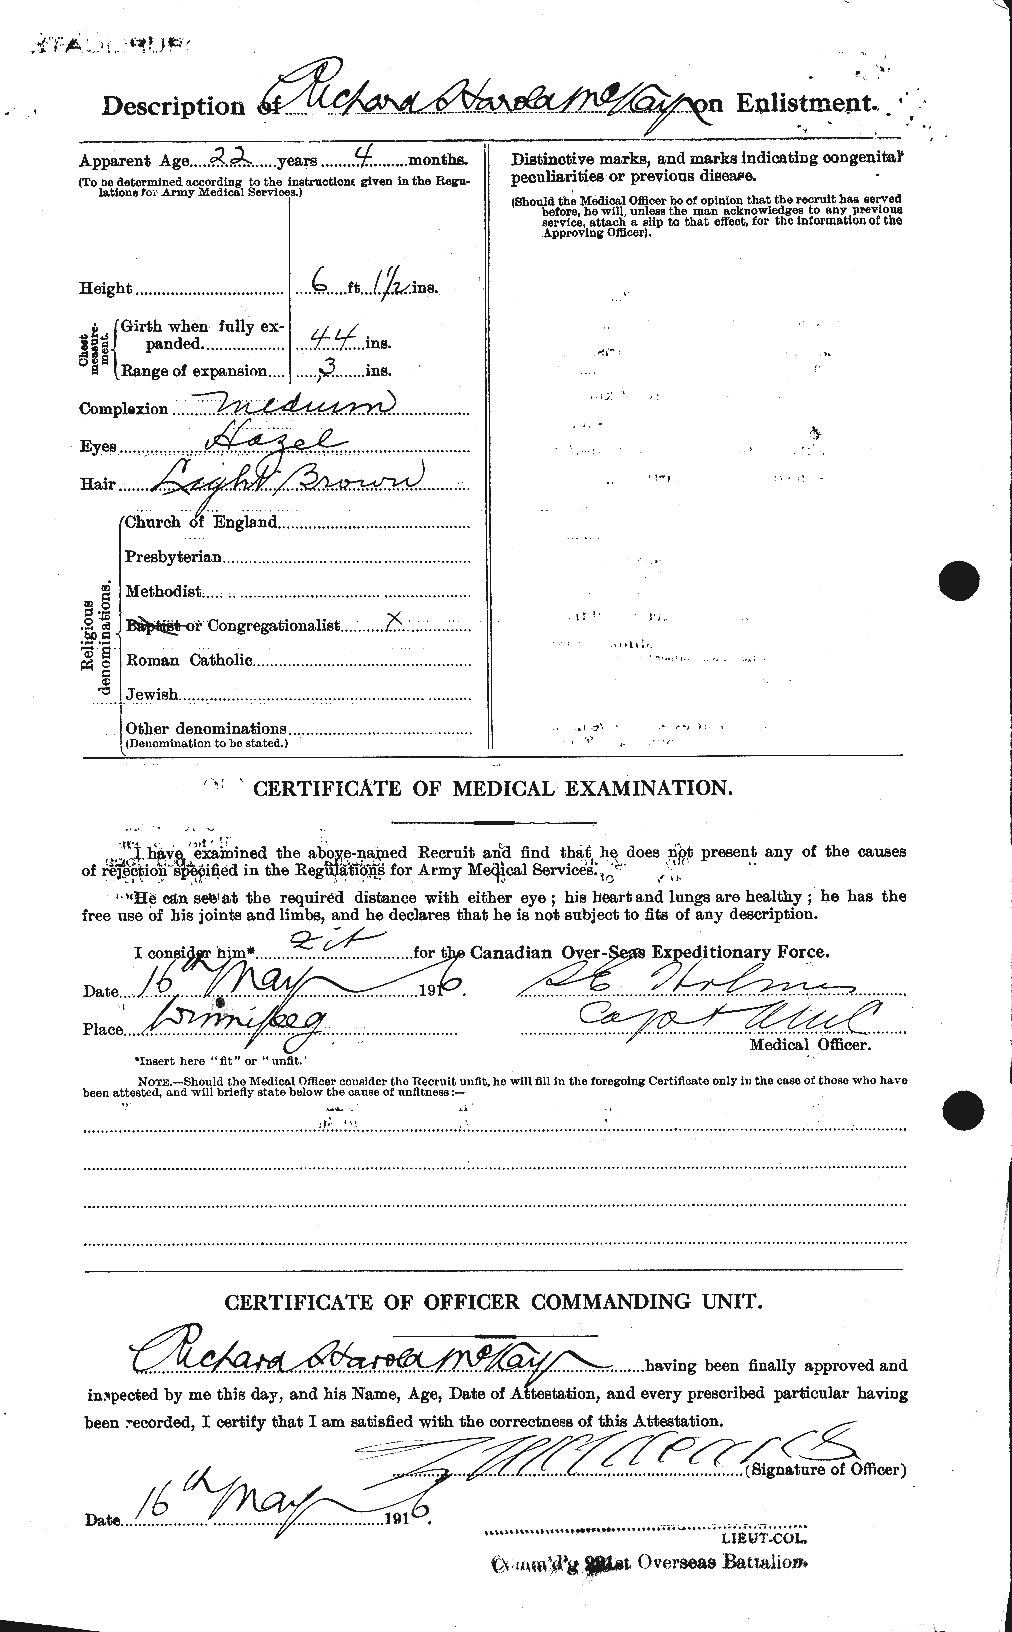 Personnel Records of the First World War - CEF 530060b